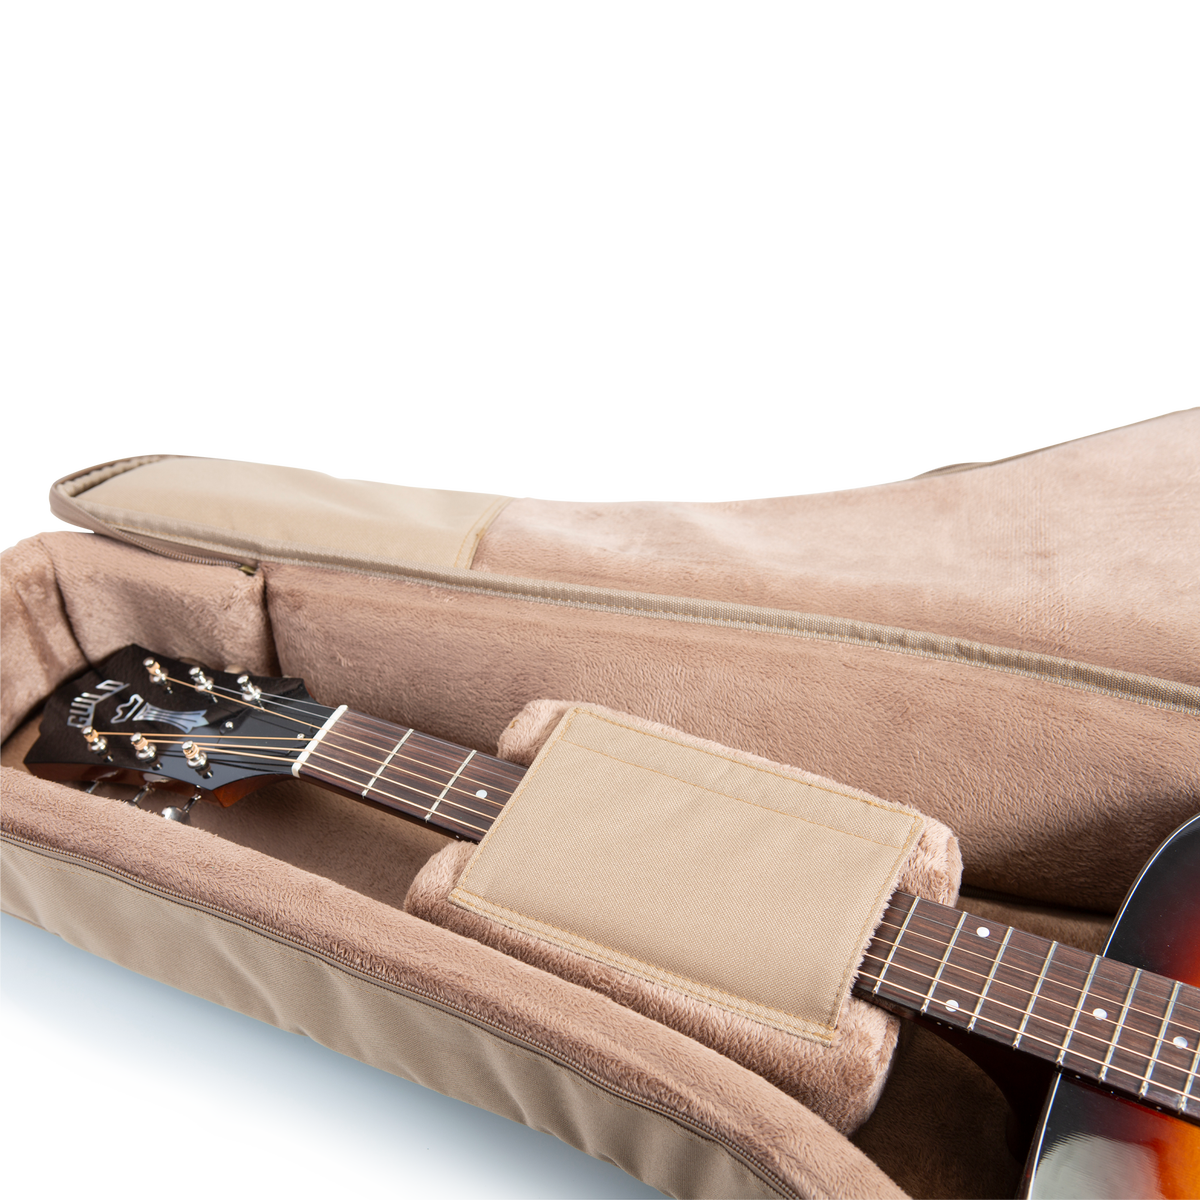 Amazon.com: On-Stage GBA4770 Standard Acoustic Guitar Gig Bag  (Dreadnought-Body Instrument Protection, Storage, and Carrying, Accessory  Compartments, Nylon Shell, Foam Padded, Adjustable Straps, Two-Pull Zipper)  : Musical Instruments